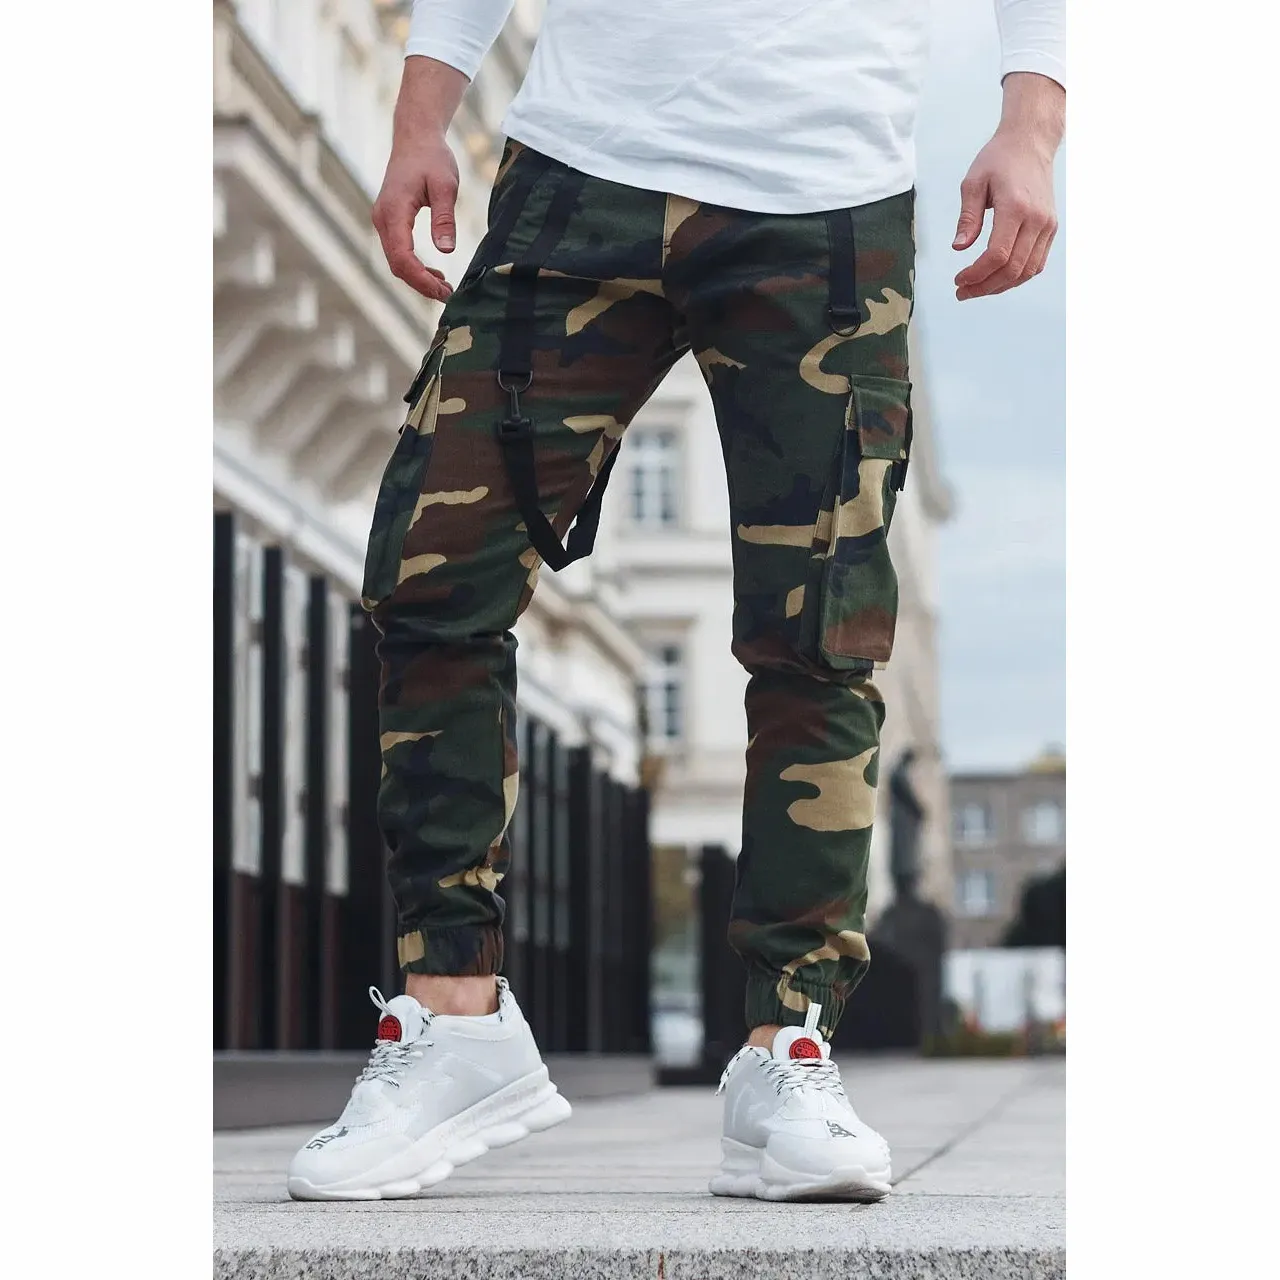 Custom Men's Workout Camouflage trousers, Athletic Running Jogger Track Pants Casual cargo pants with Pockets